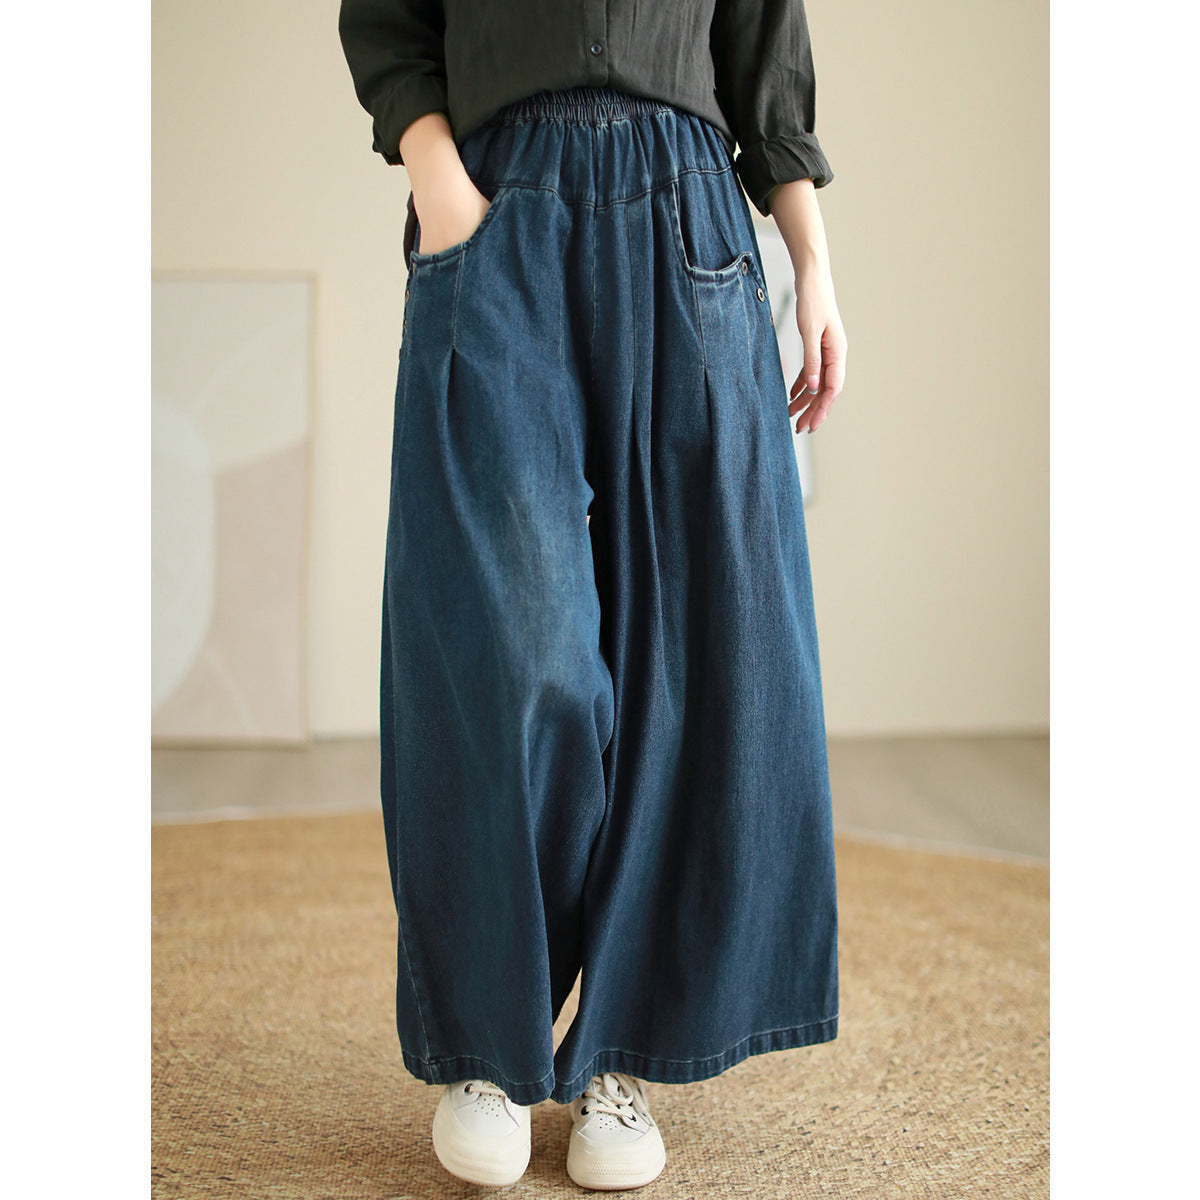 Casual Elastic Waist Fall Wide Legs Jeans for Women-Pants-Blue-L under 62 kg-Free Shipping Leatheretro